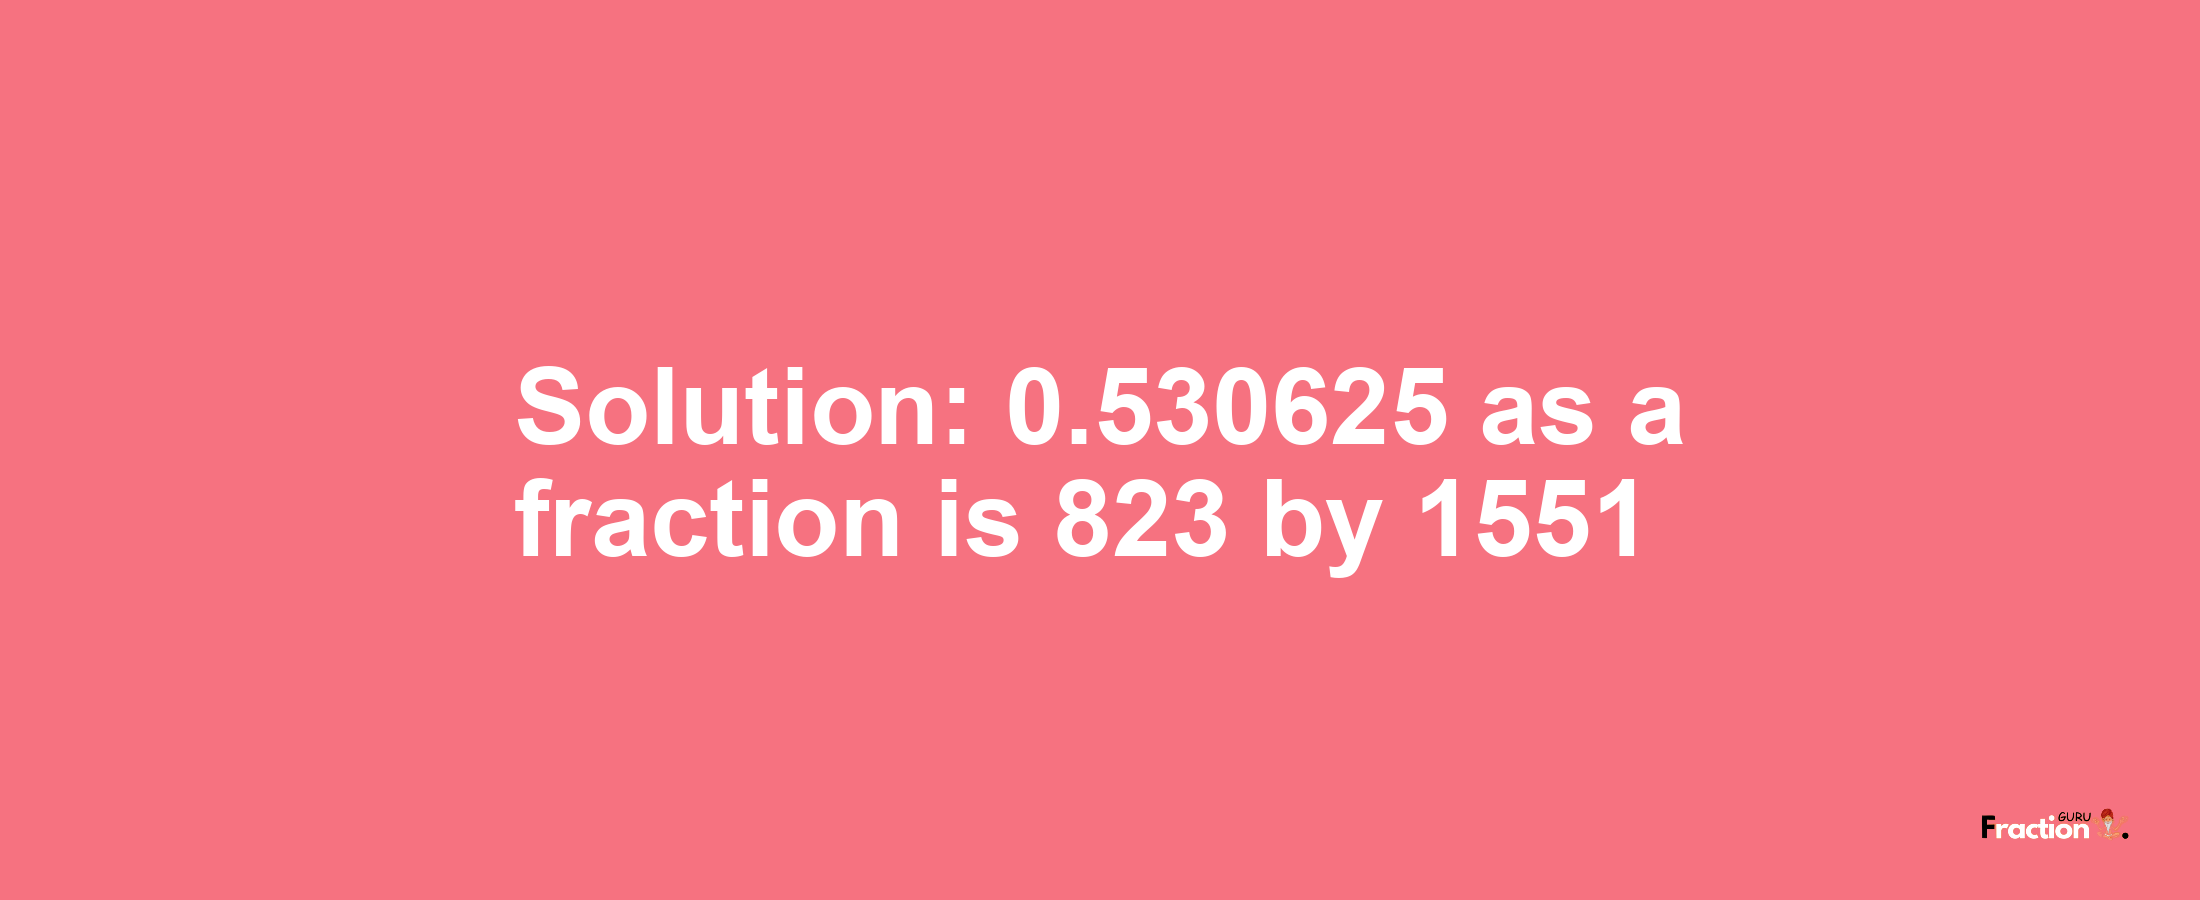 Solution:0.530625 as a fraction is 823/1551